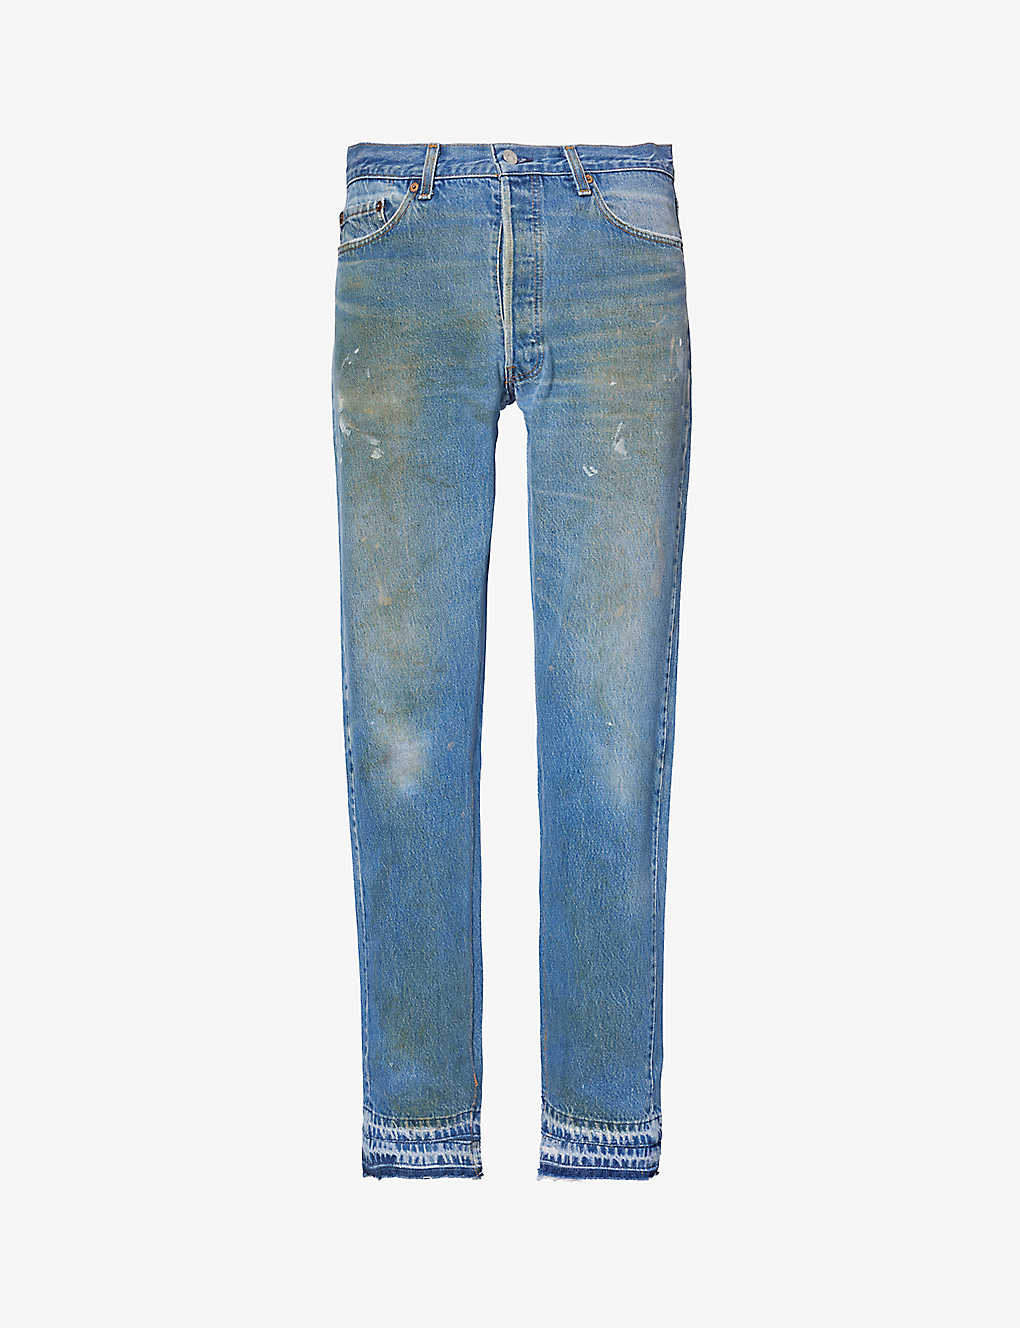 Gallery Dept. Gallery Dept Mens Indigo 5001 Faded-wash Mid-rise Jeans